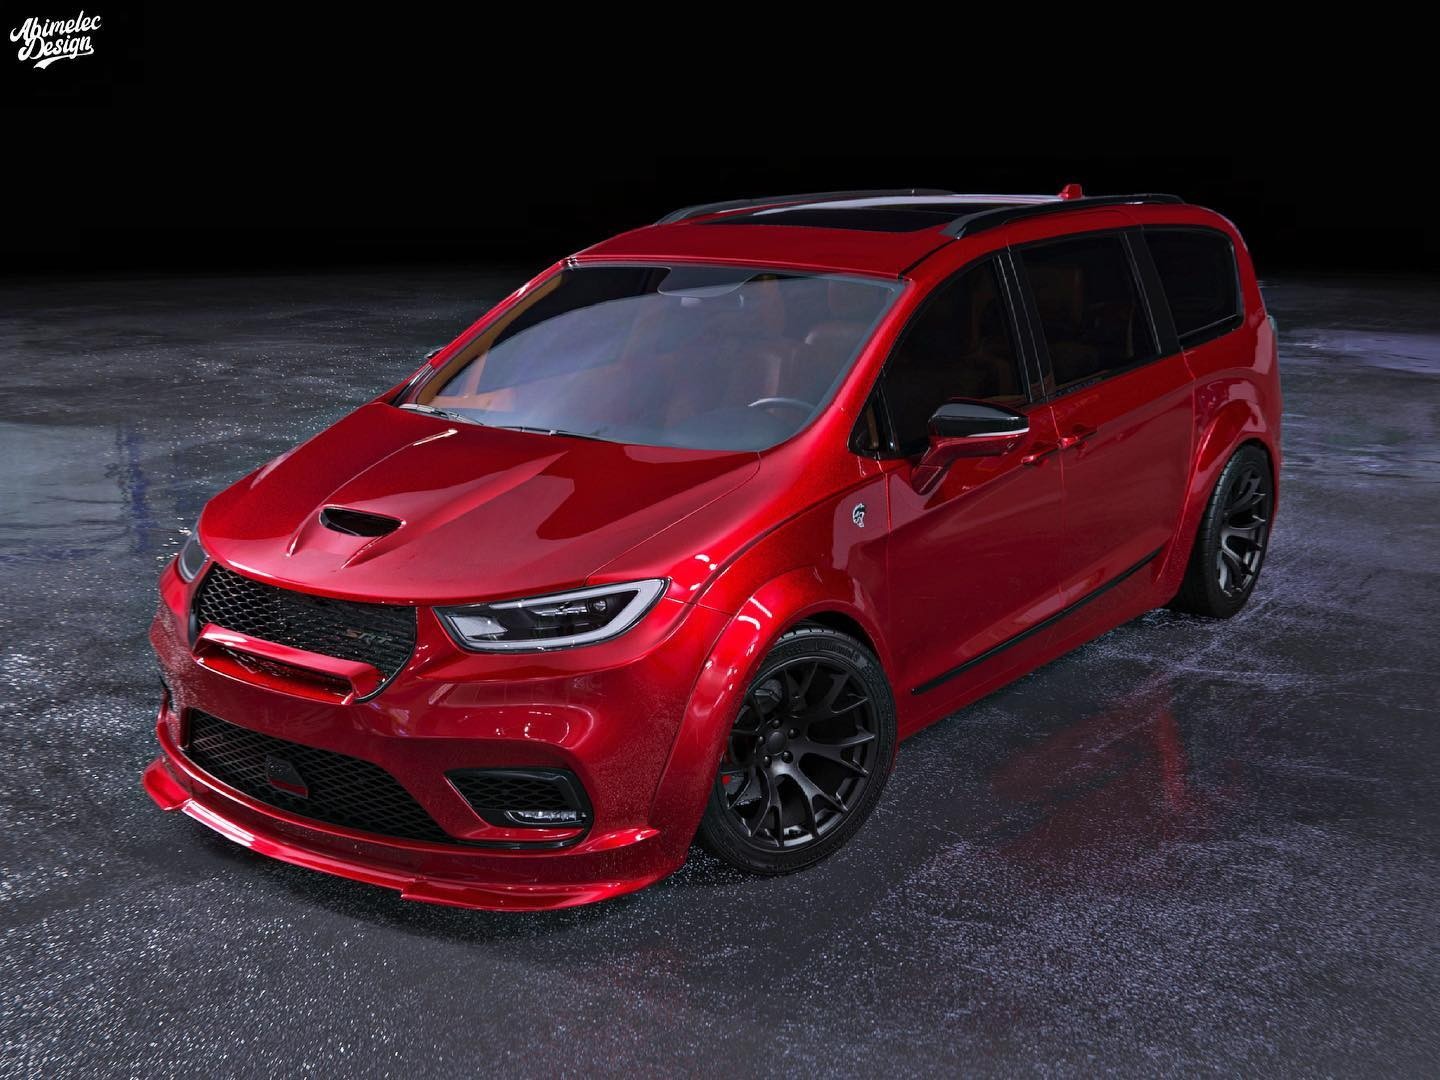 Chrysler Pacifica Hellcat Is Coming This Year for the Ultimate Family